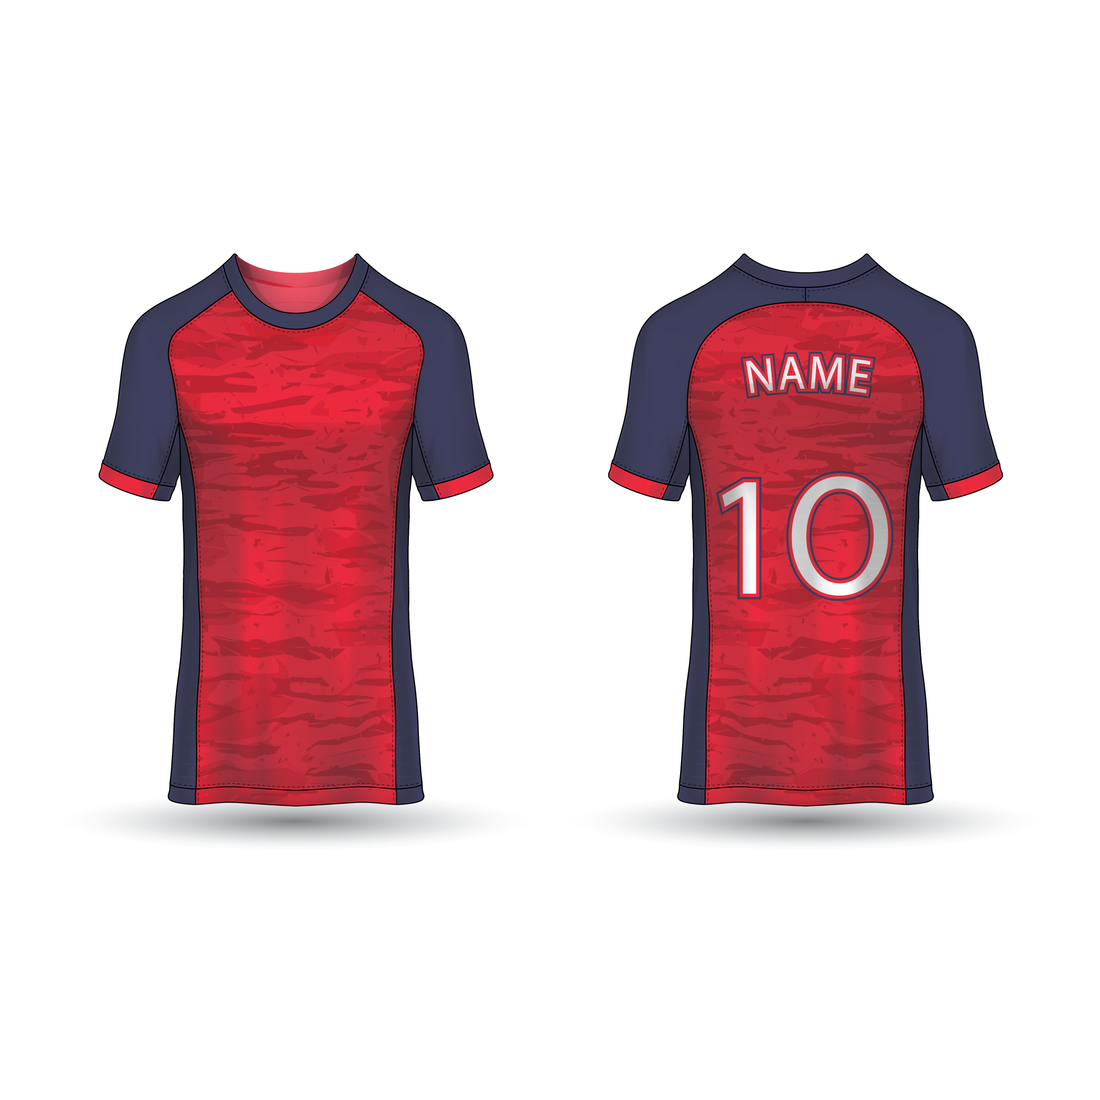 NEXT PRINT All Over Printed Customized Sublimation T-Shirt Unisex Sports Jersey Player Name & Number, Team Name NP50000210